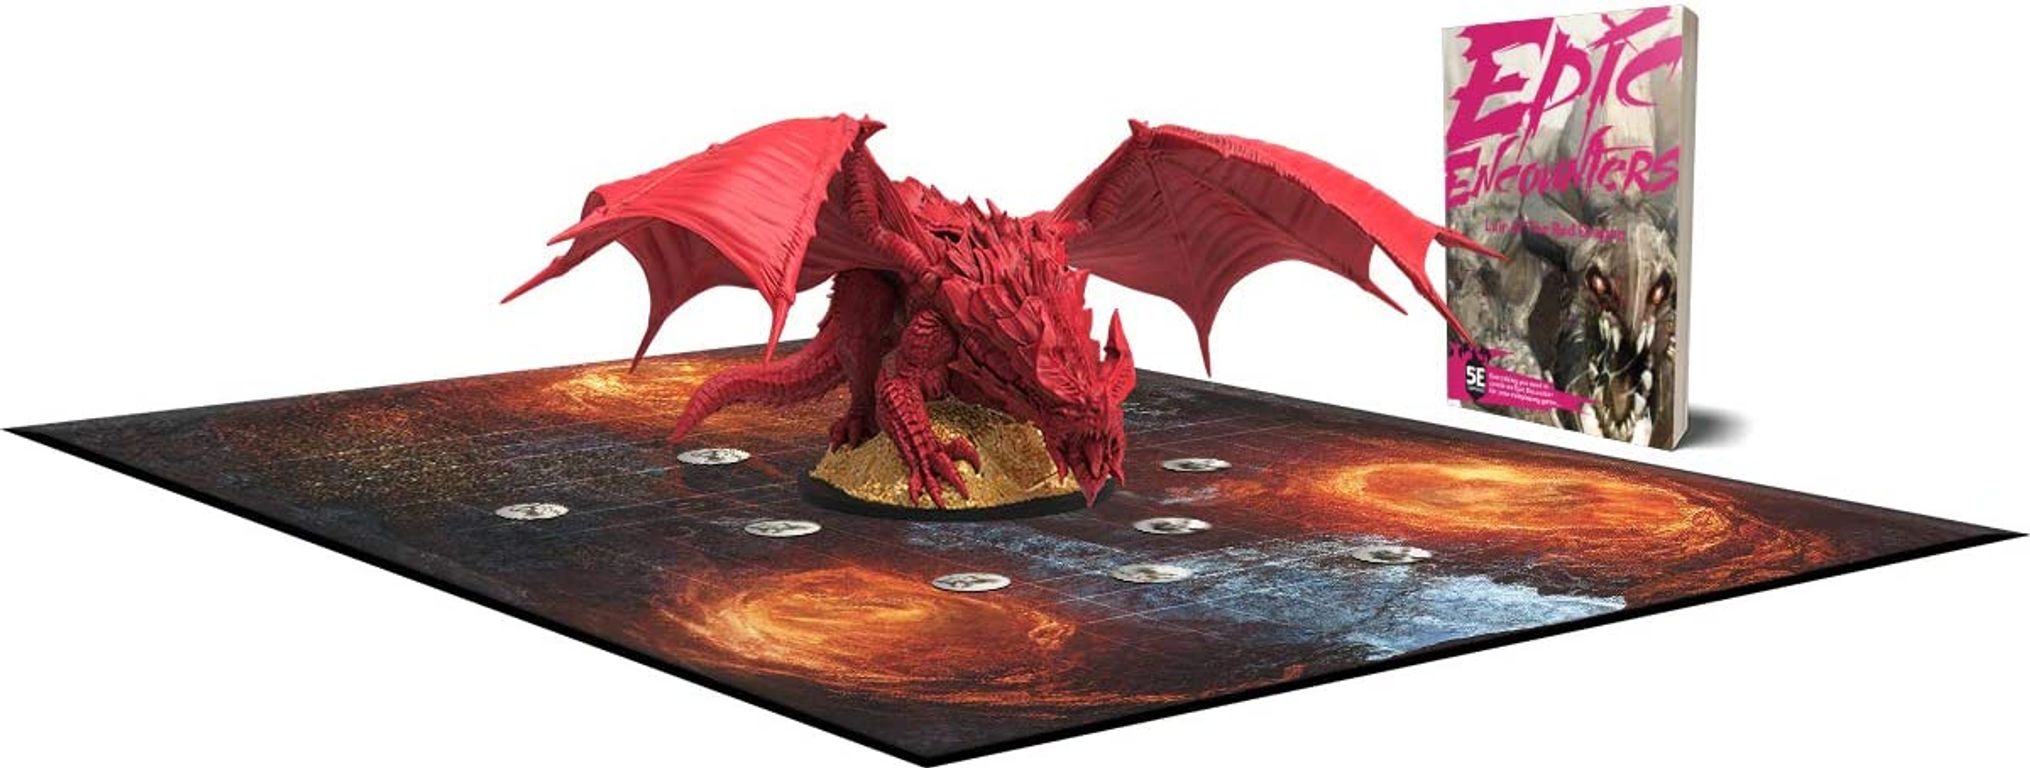 Epic Encounters: Lair of the Red Dragon components